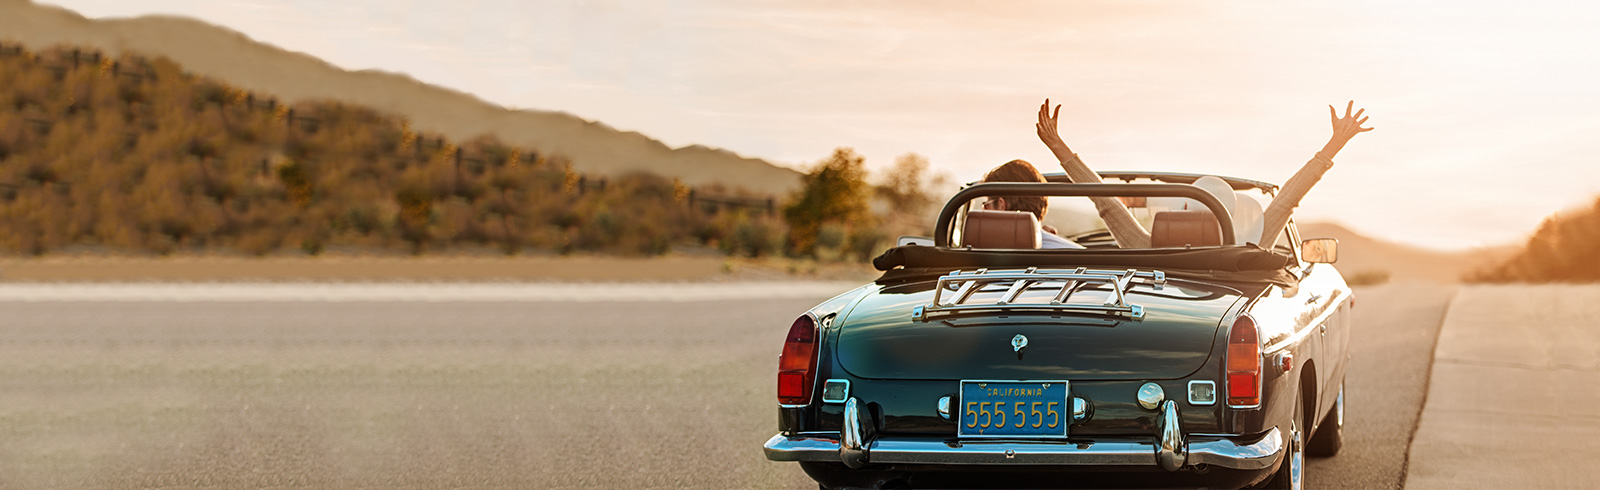 Car Insurance gives you a peaceful journey with a comprehensive coverage.